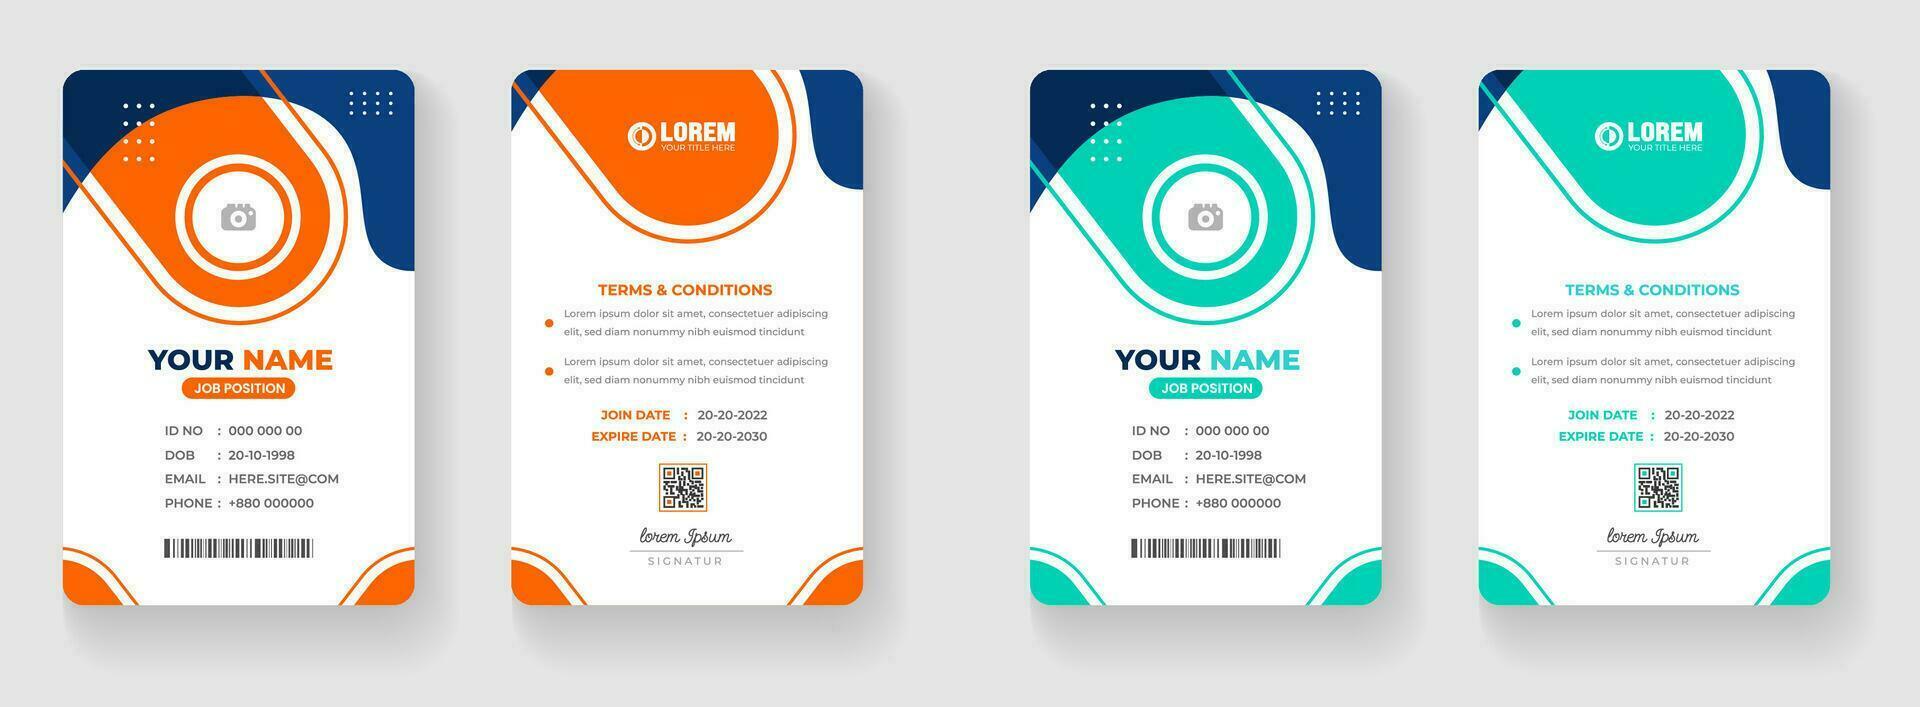 corporate business office id card design set with blue and yellow color. vector